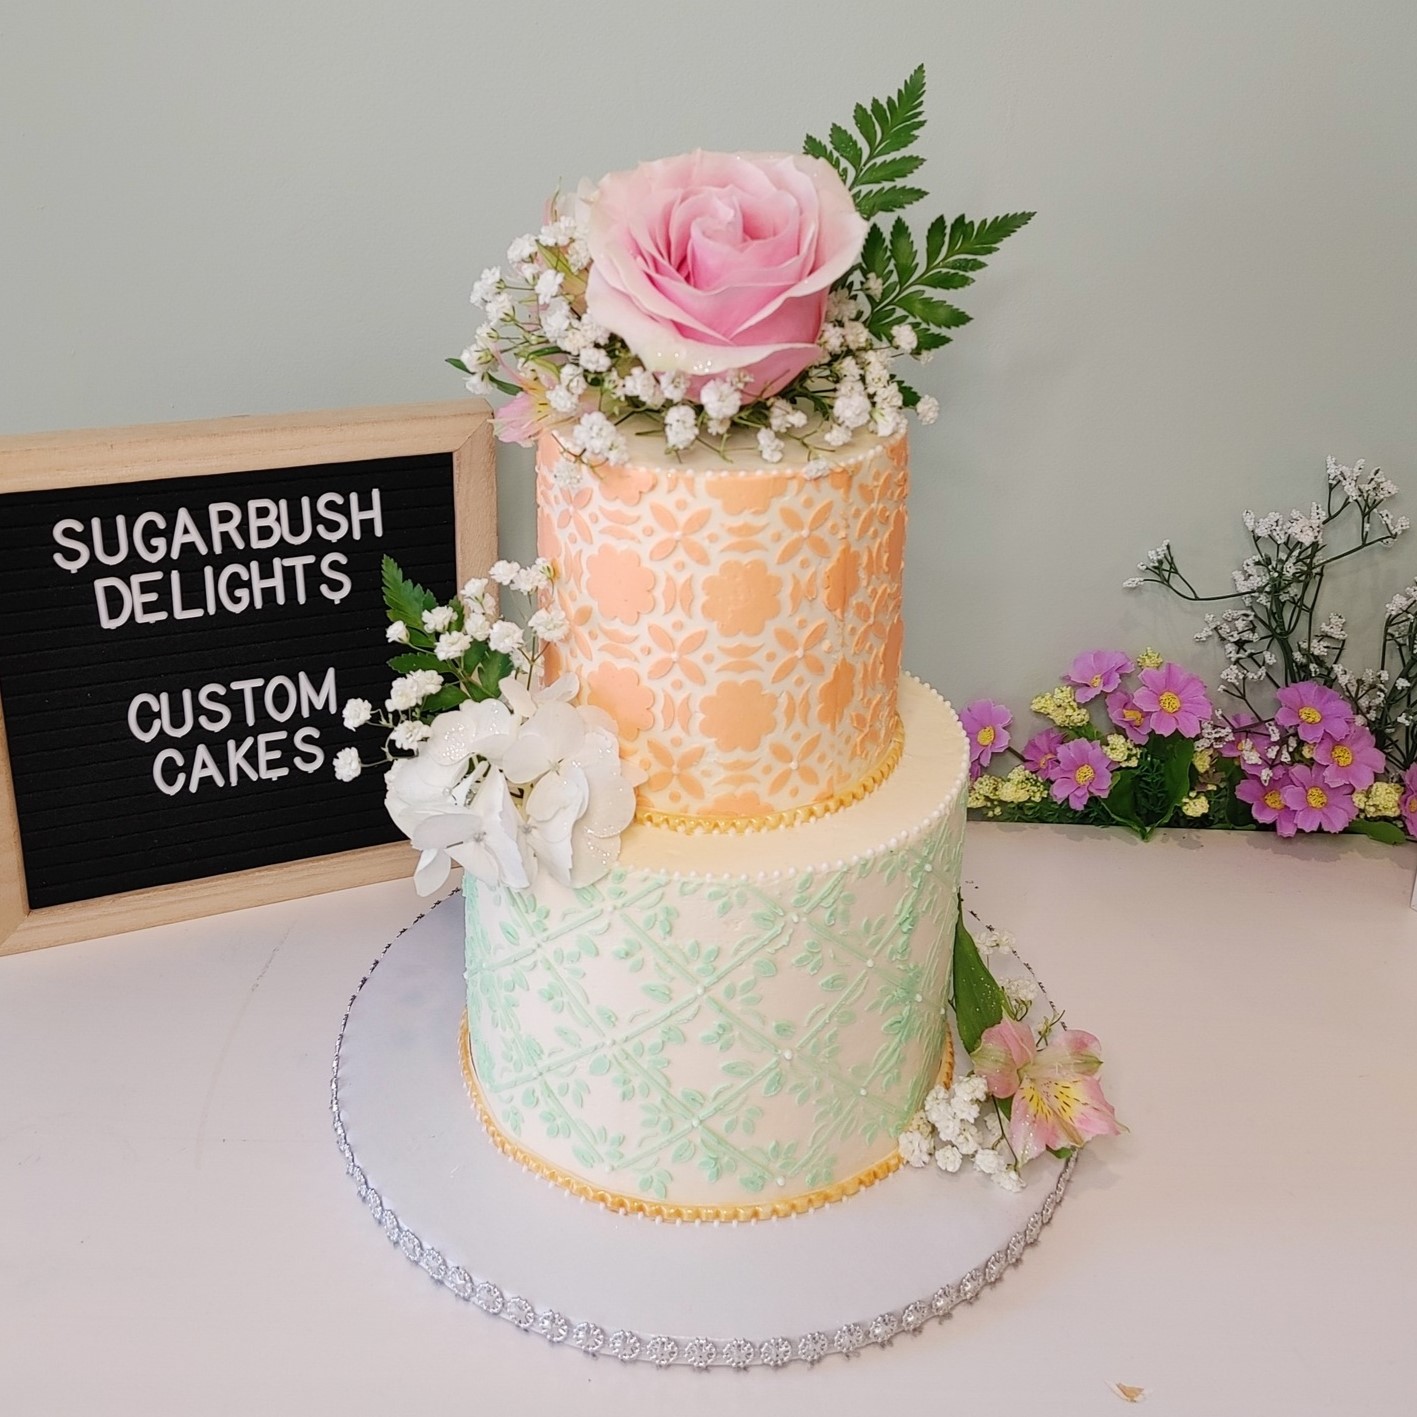 A 2 tier white cake with orange lace buttercream on the first tier and green on the second tier. There is a pink rose on top with white babys breath and 2 green leaves. There is a white flower with babys breath on top of the second tier.